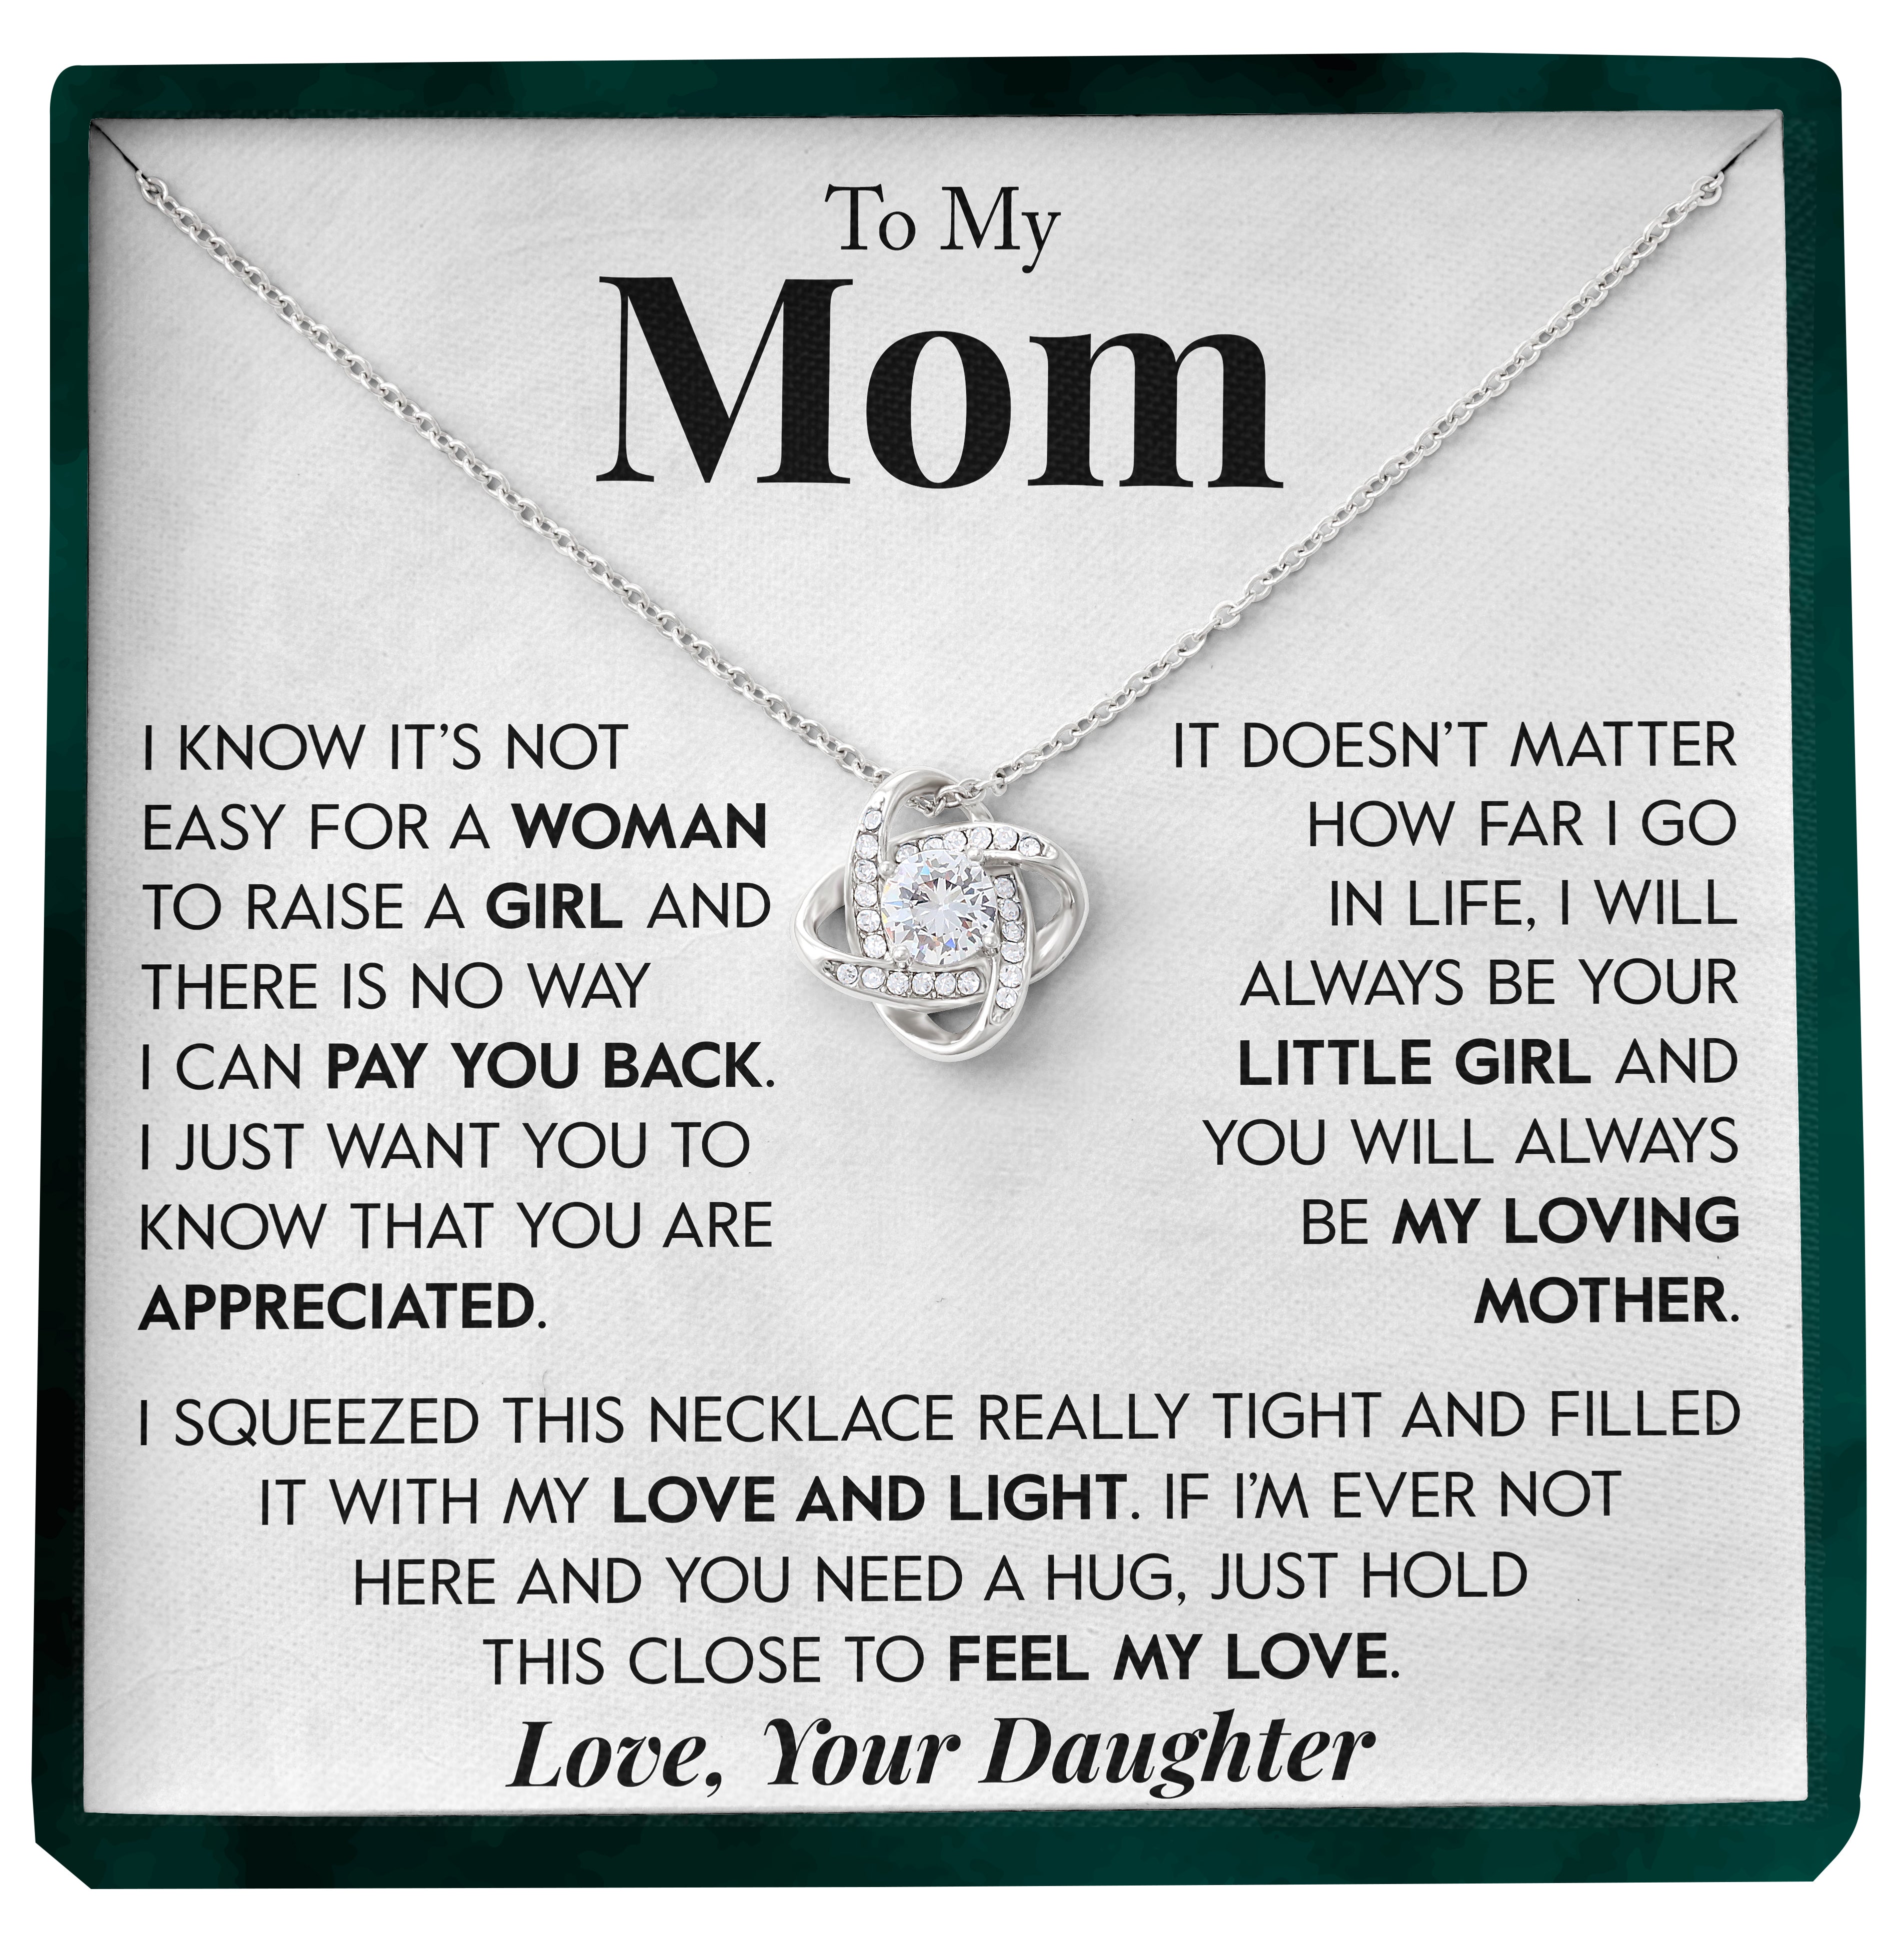 To My Mom | "Love and Light" | Love Knot Necklace